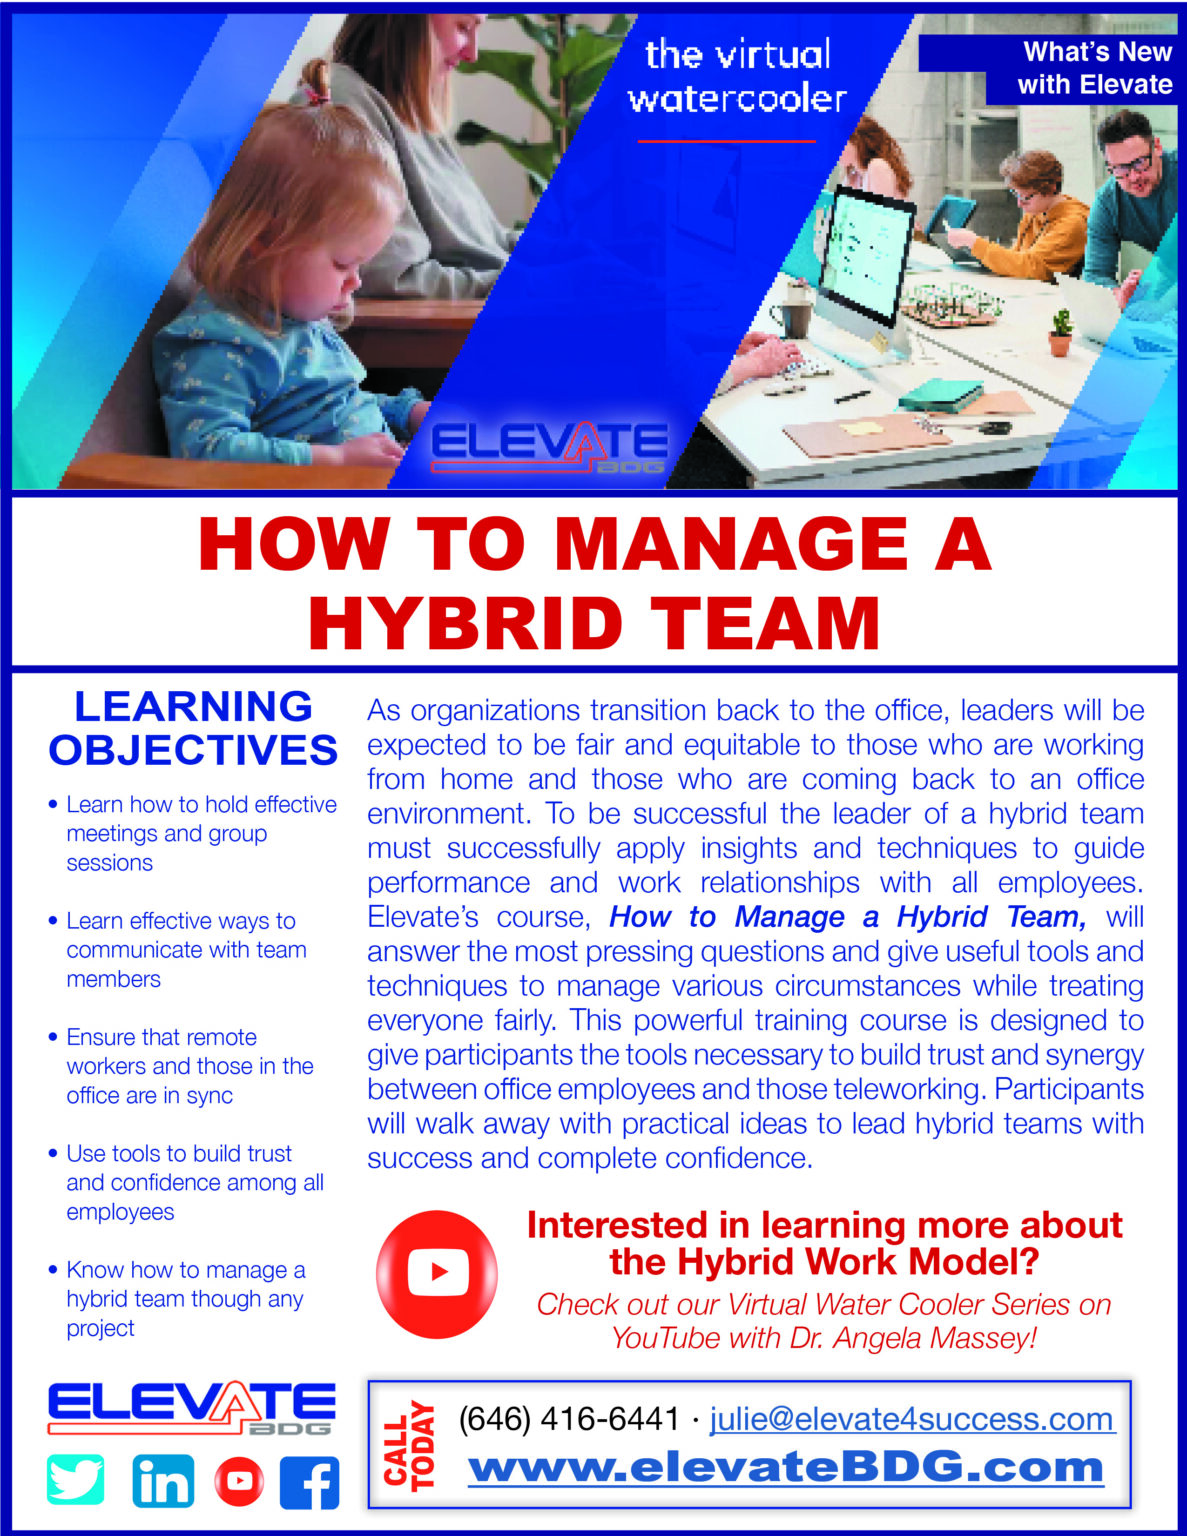 HOW TO MANAGE A HYBRID WORKFORCE